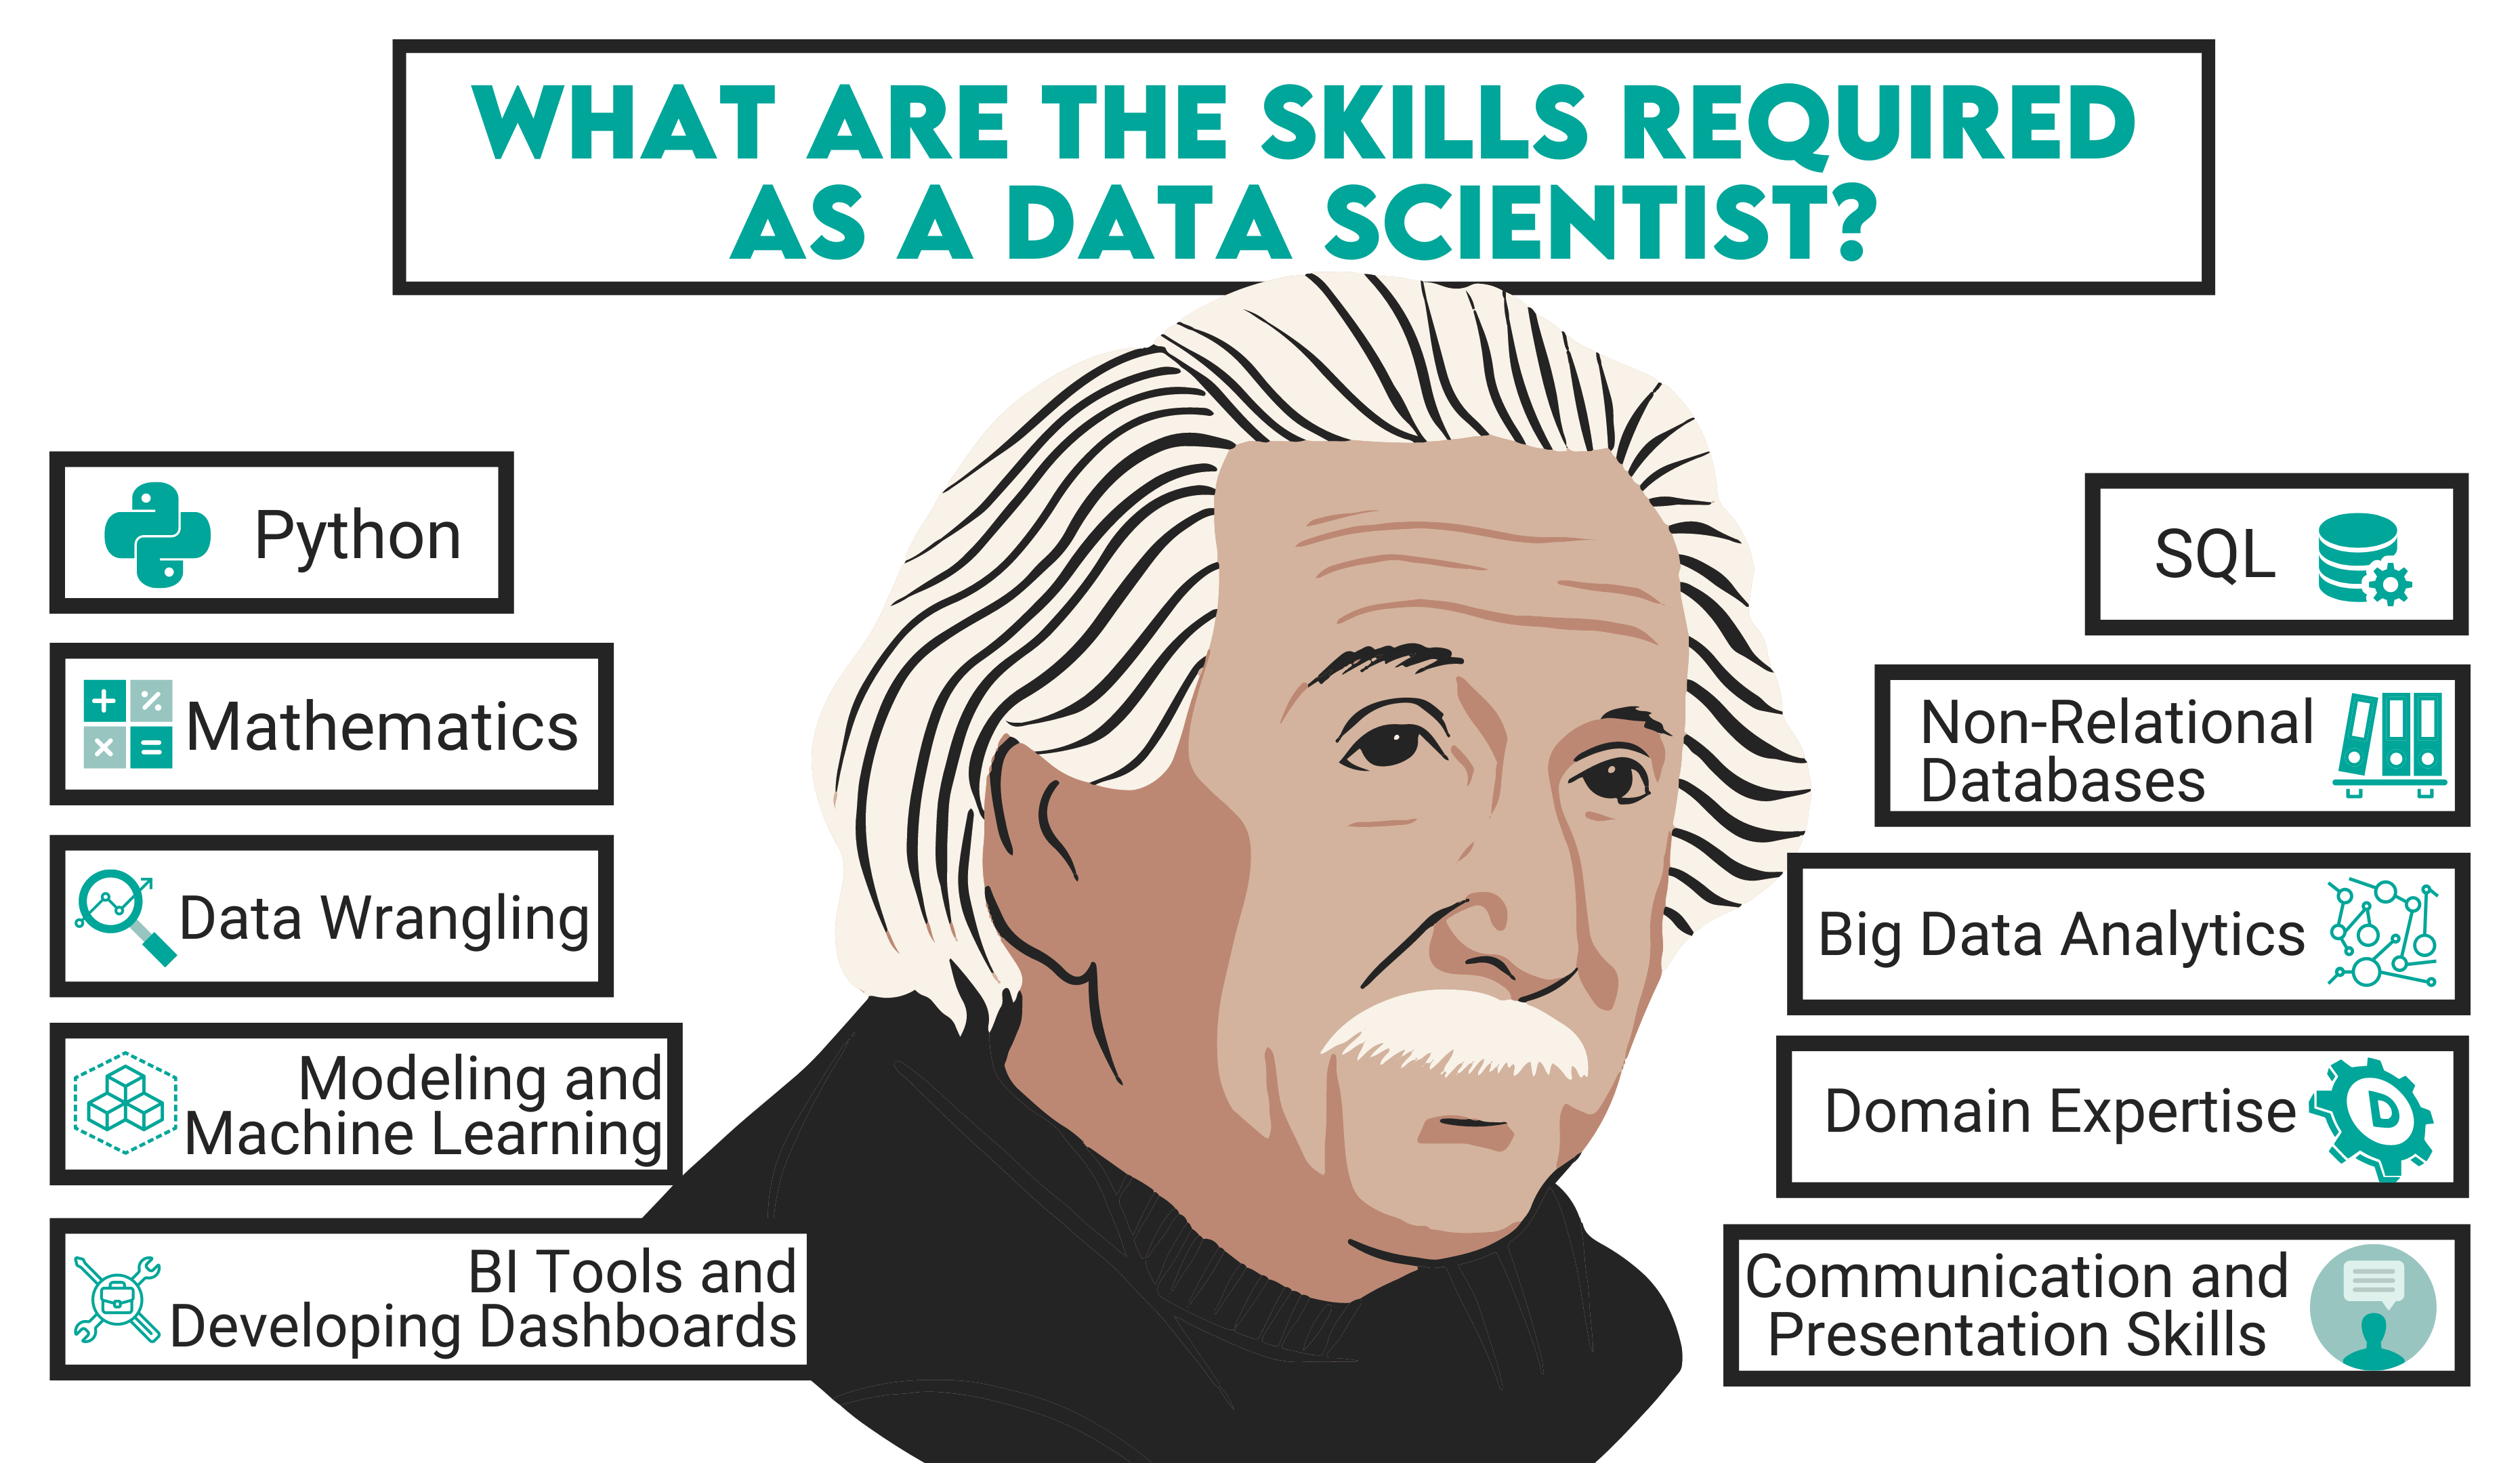 What are the skills required as a Data Scientist